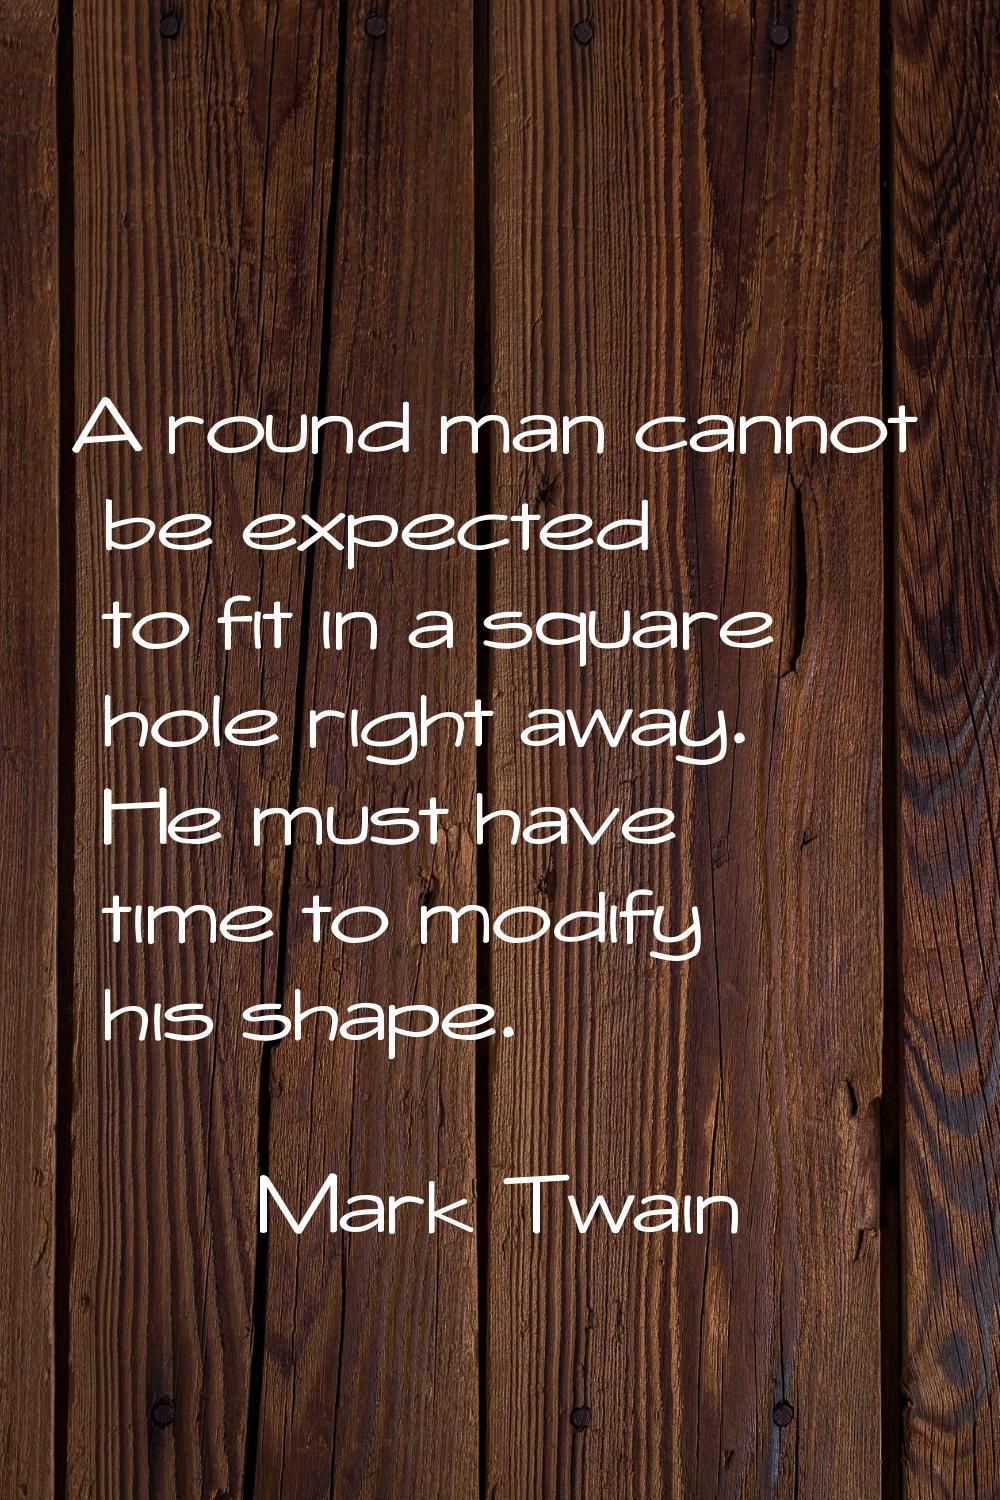 A round man cannot be expected to fit in a square hole right away. He must have time to modify his 